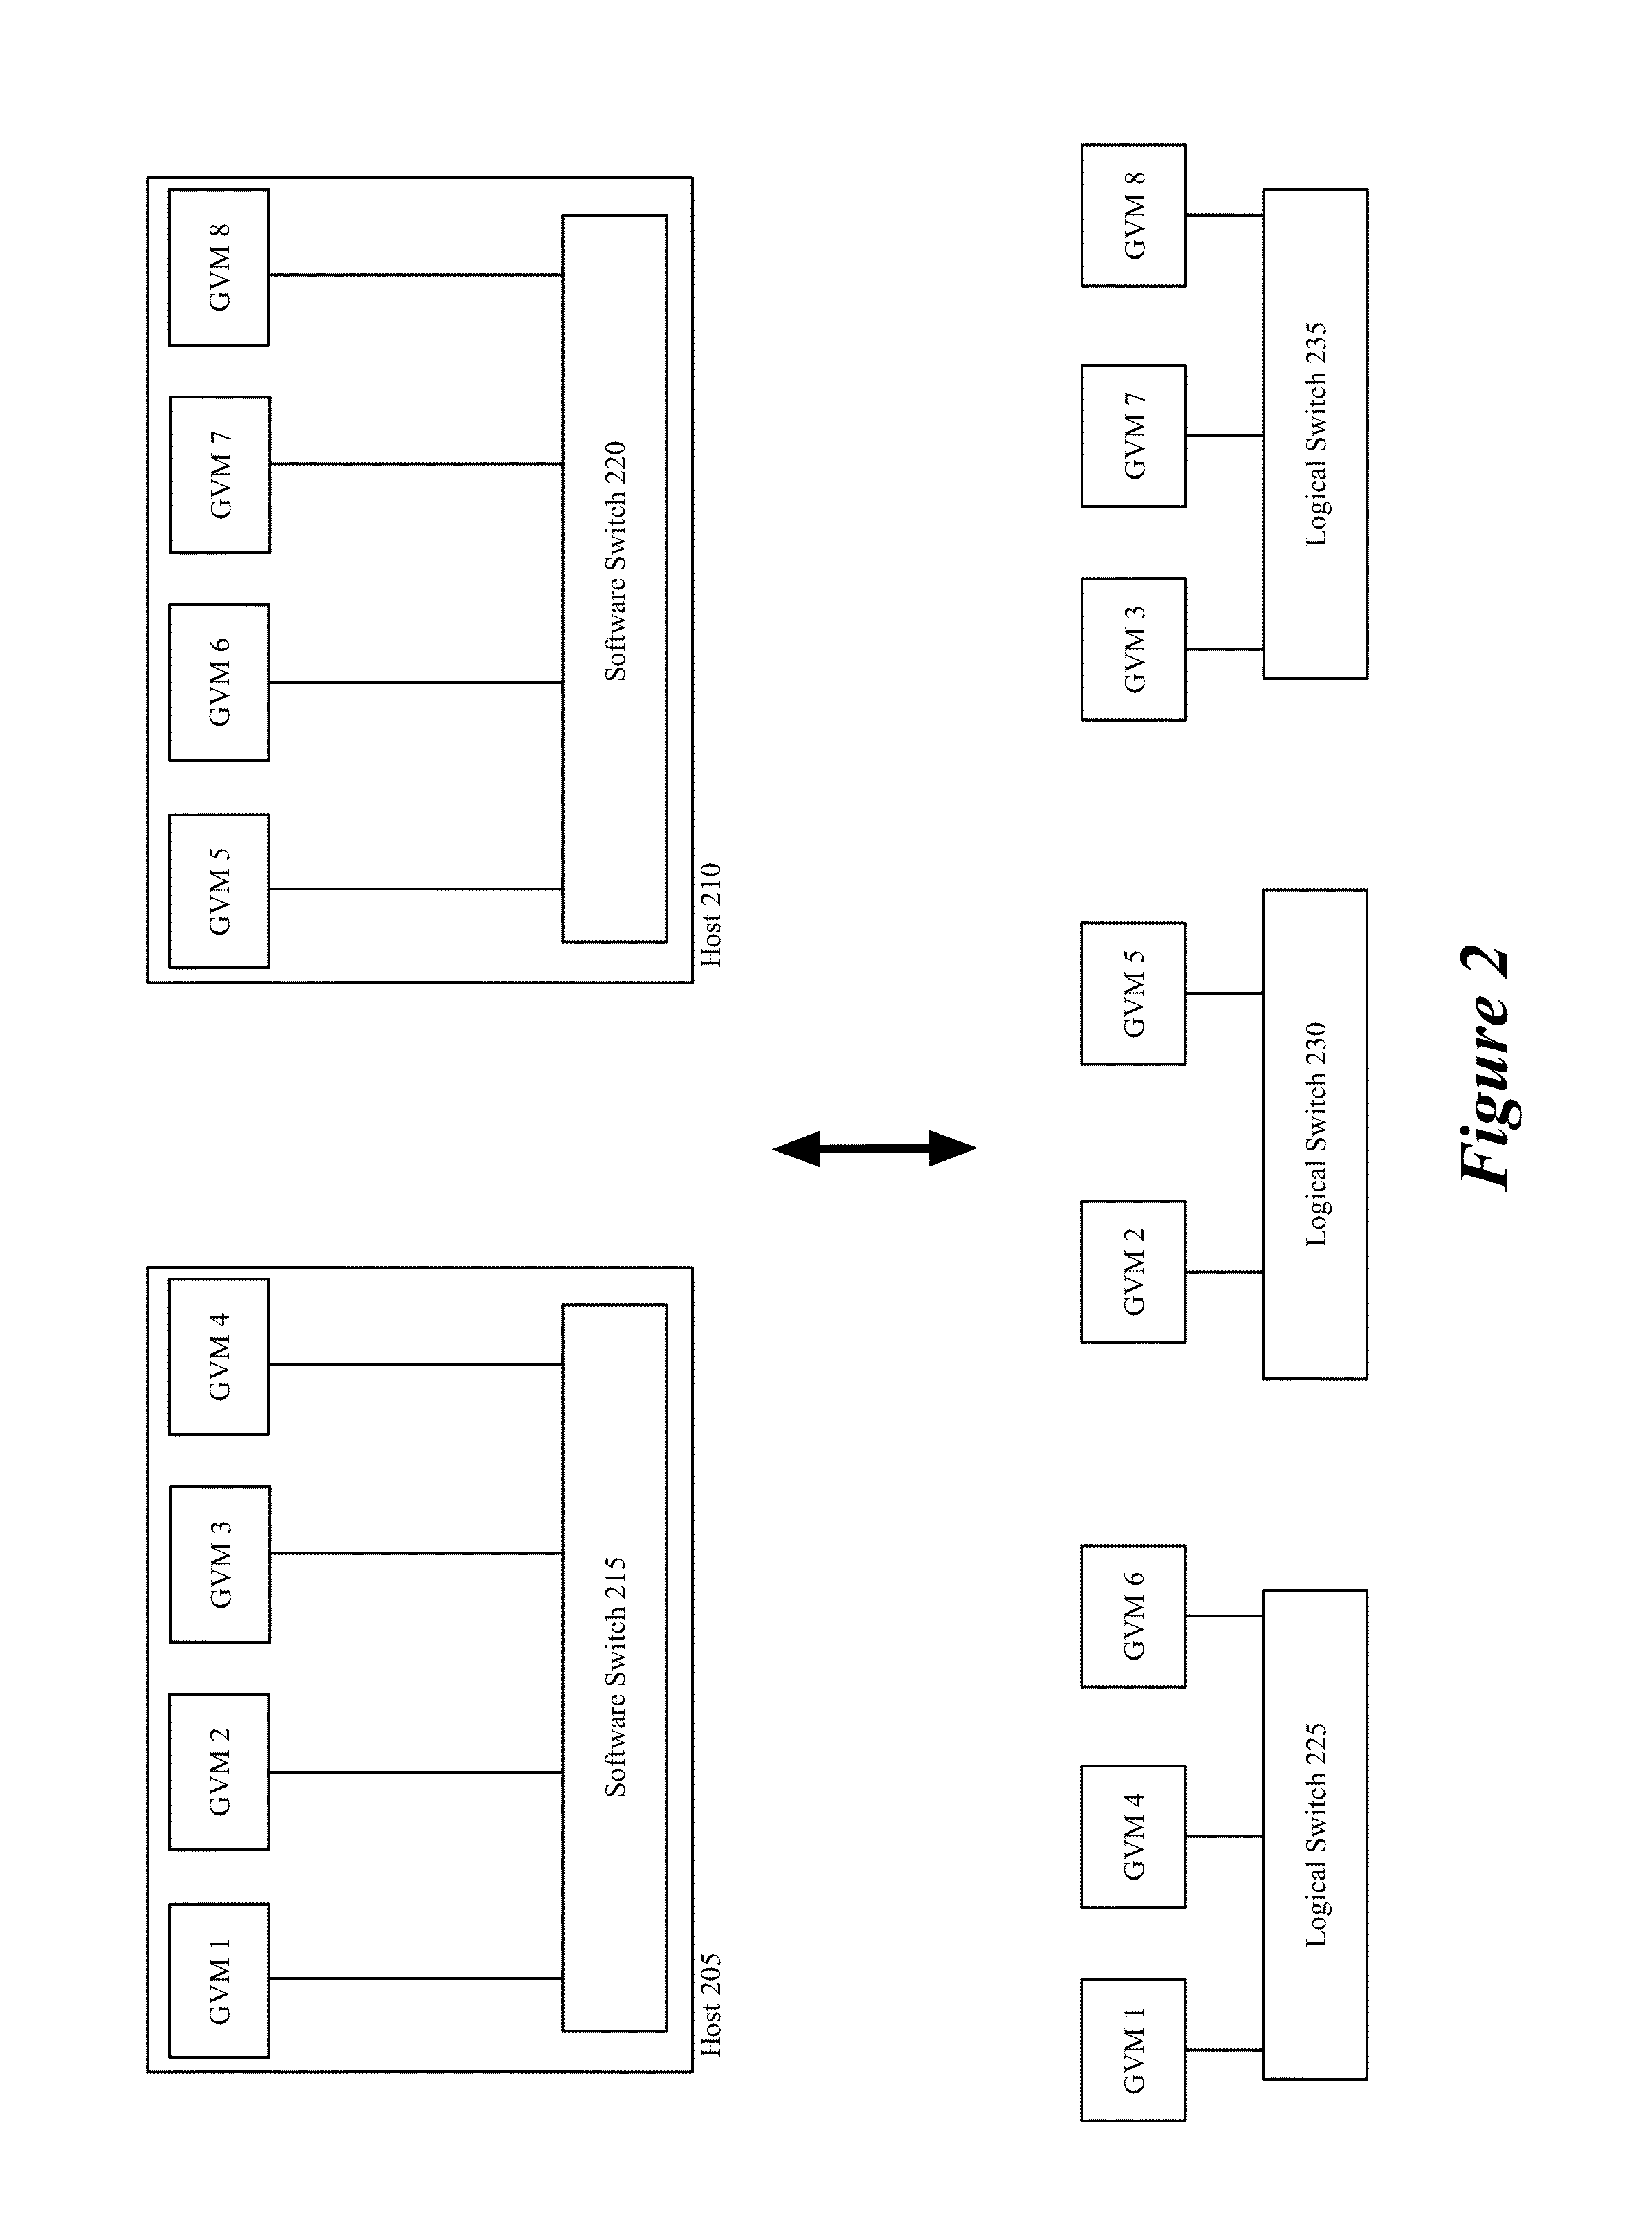 Method and apparatus for integrating a service virtual machine